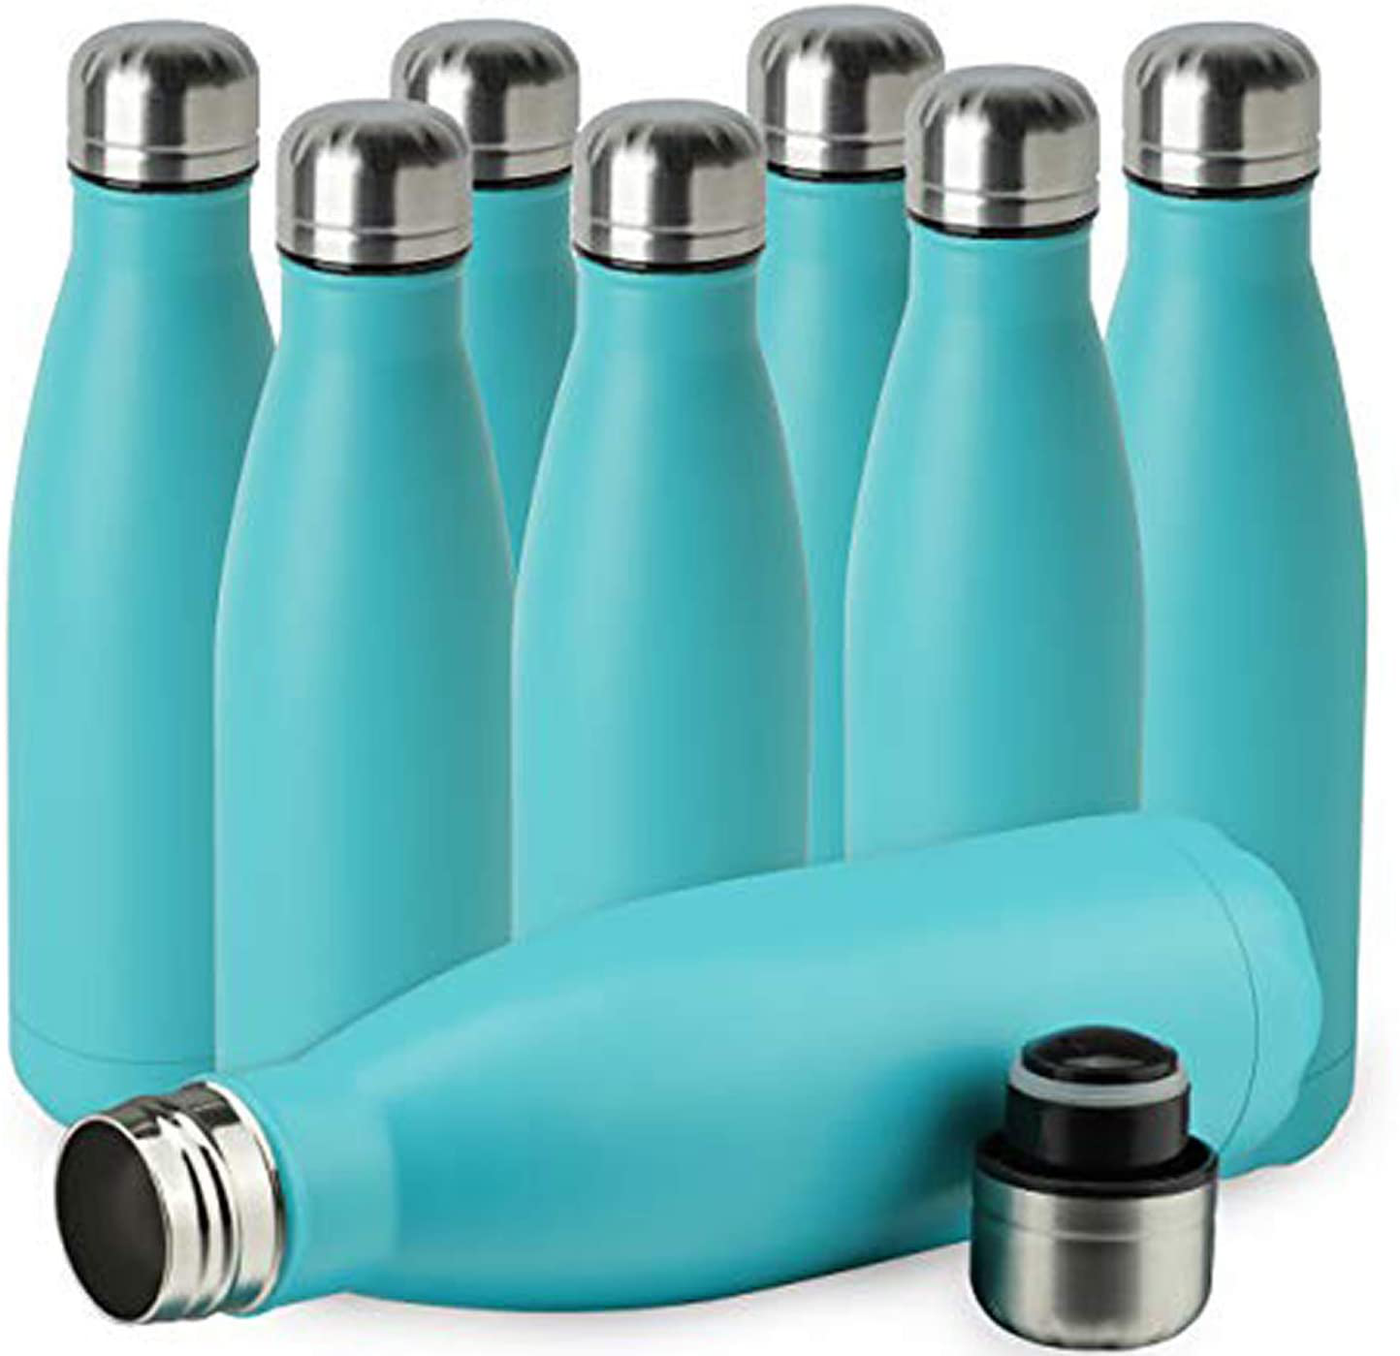 JEAREY 17oz Stainless Steel Water Bottle Double Walled Sports Water Bottle Vacuum Insulated Cola Shape Travel Thermal Flask BPA Free